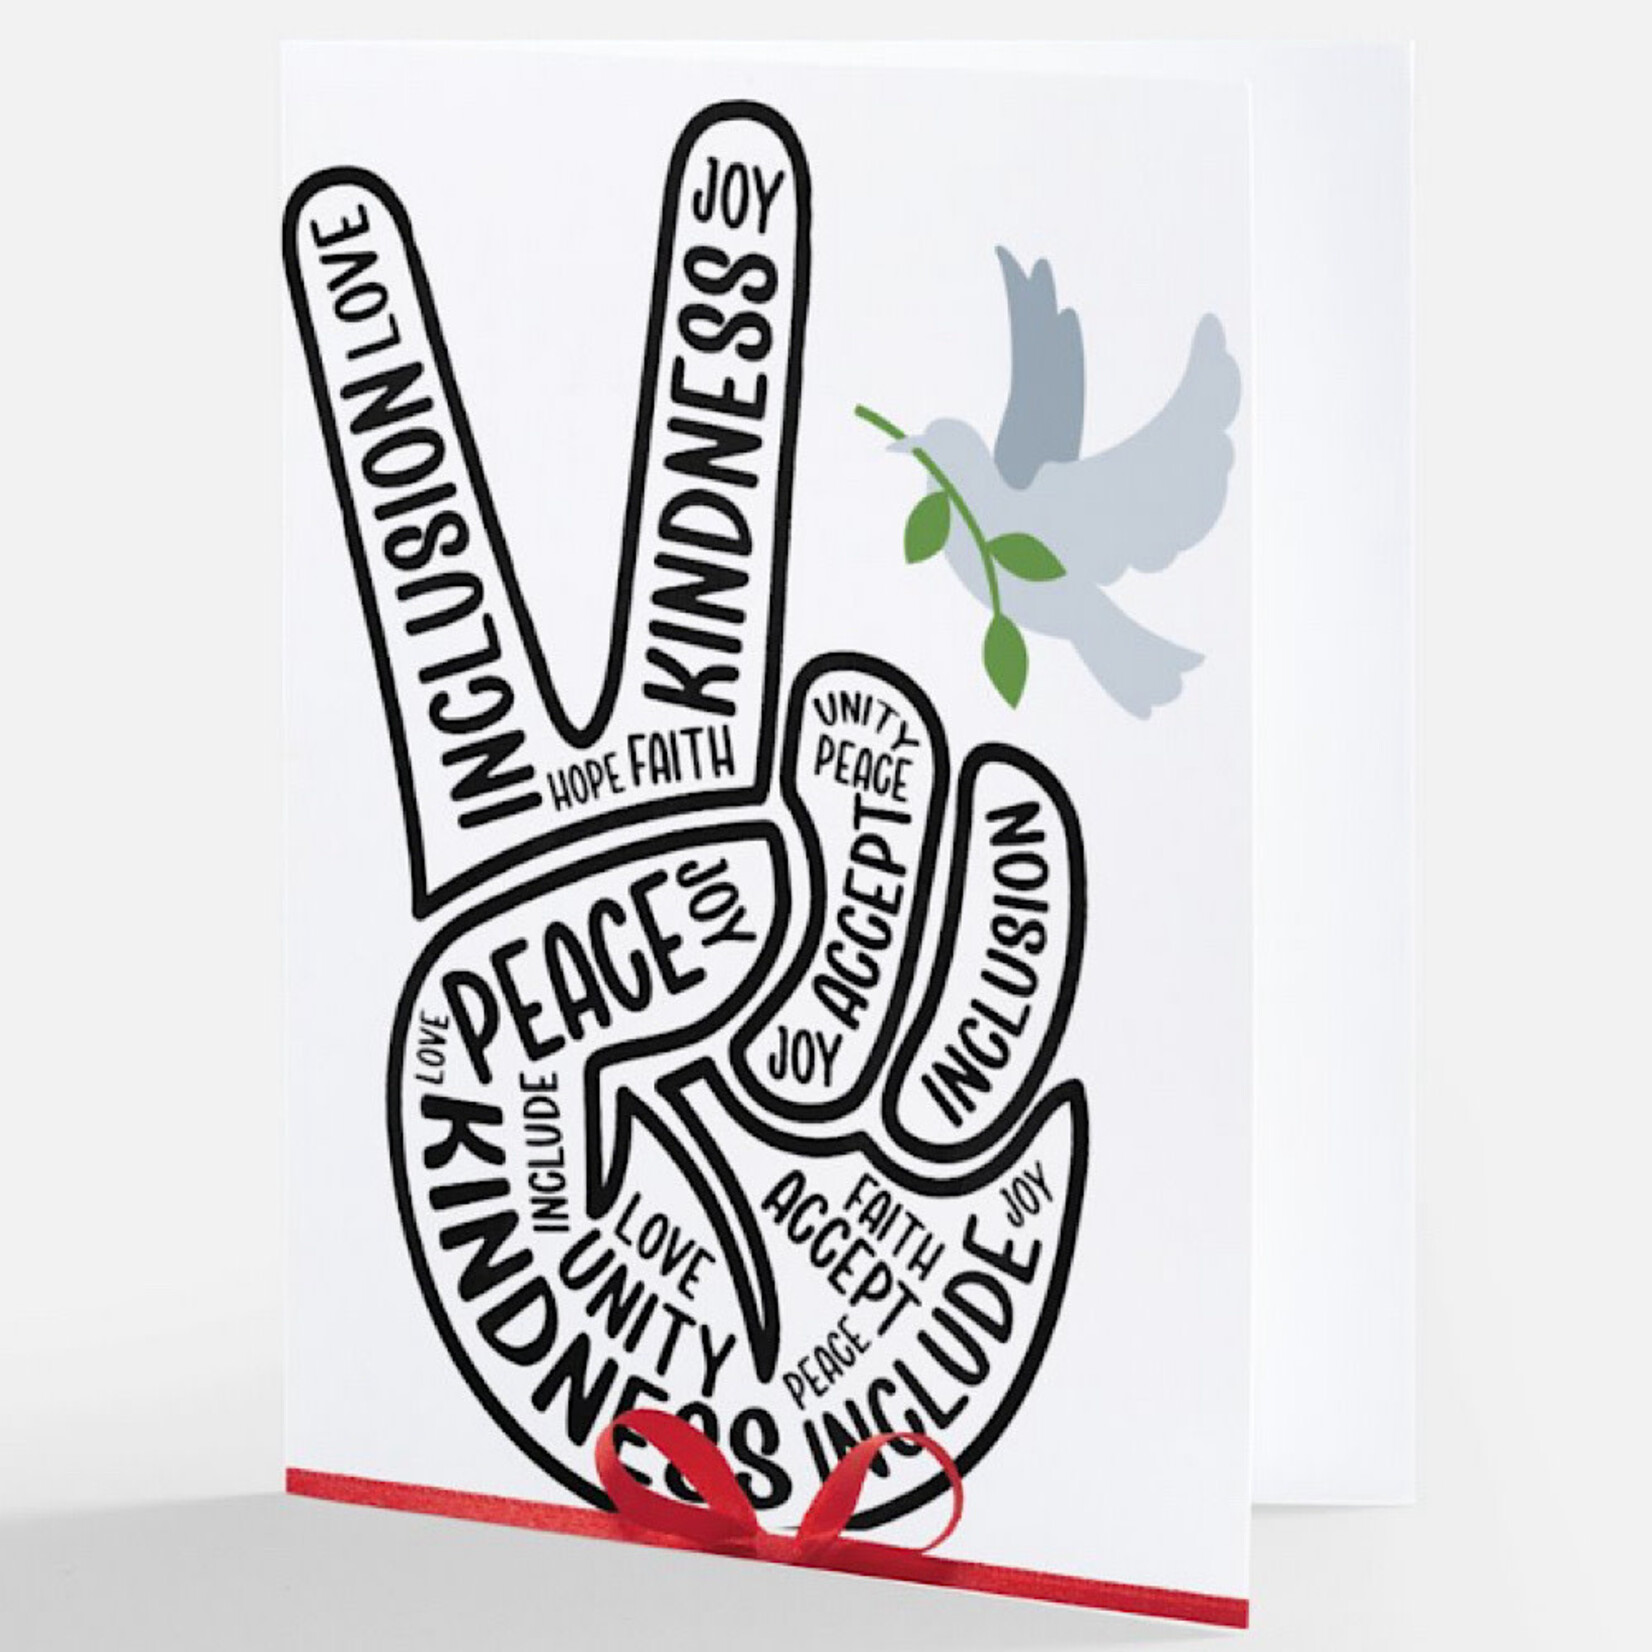 Bad Annie’s Card (Holiday) (10 Pack) - Peace Sign Hand Inclusion Love Joy Kindness Unity